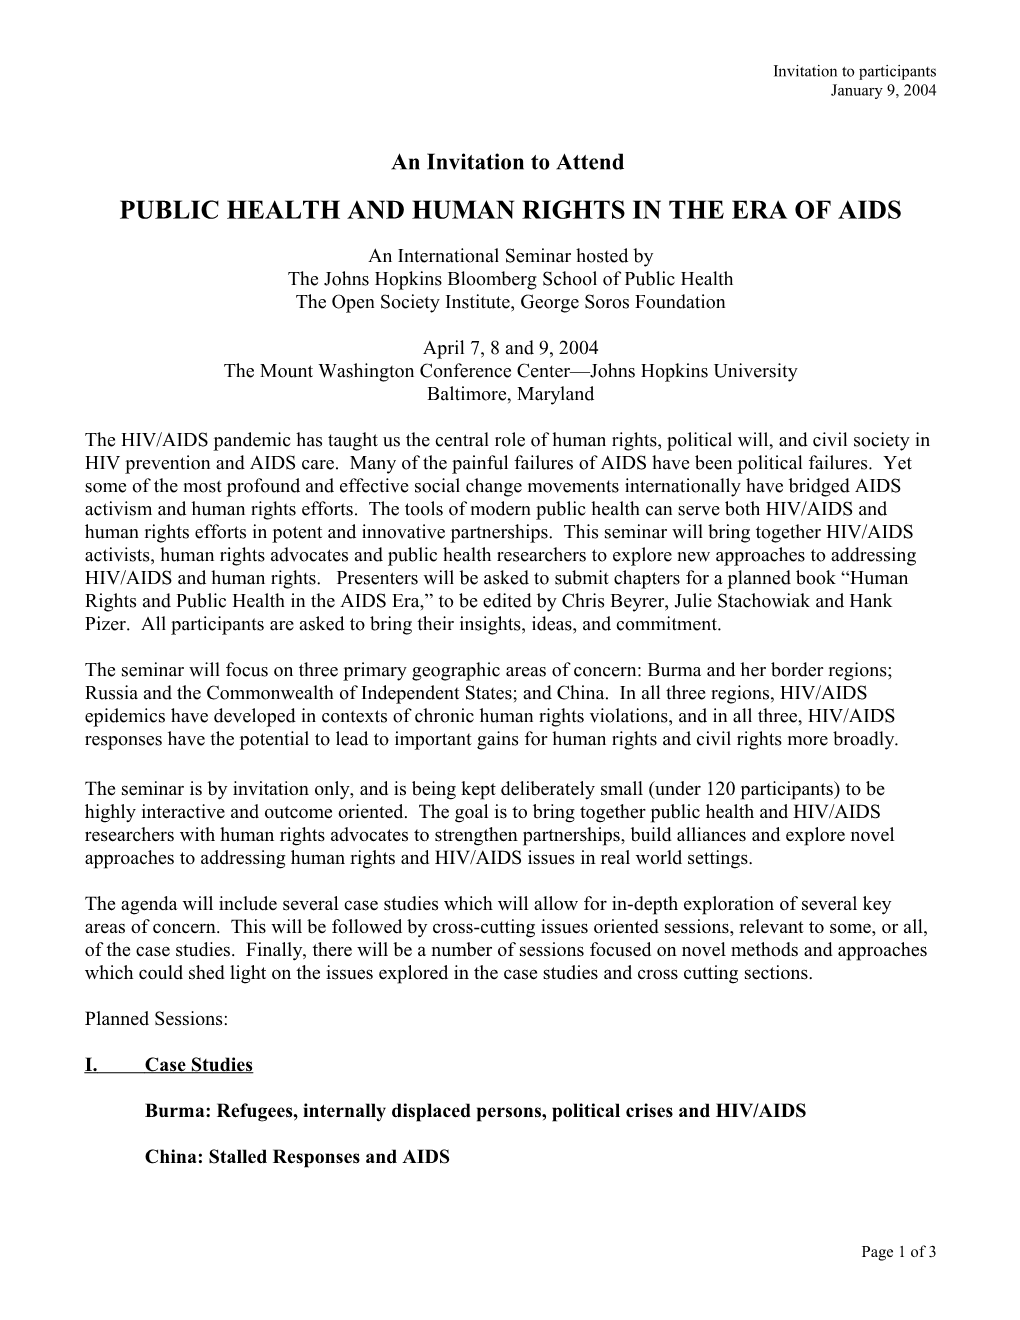 Public Health and Human Rights in the Era of Aids